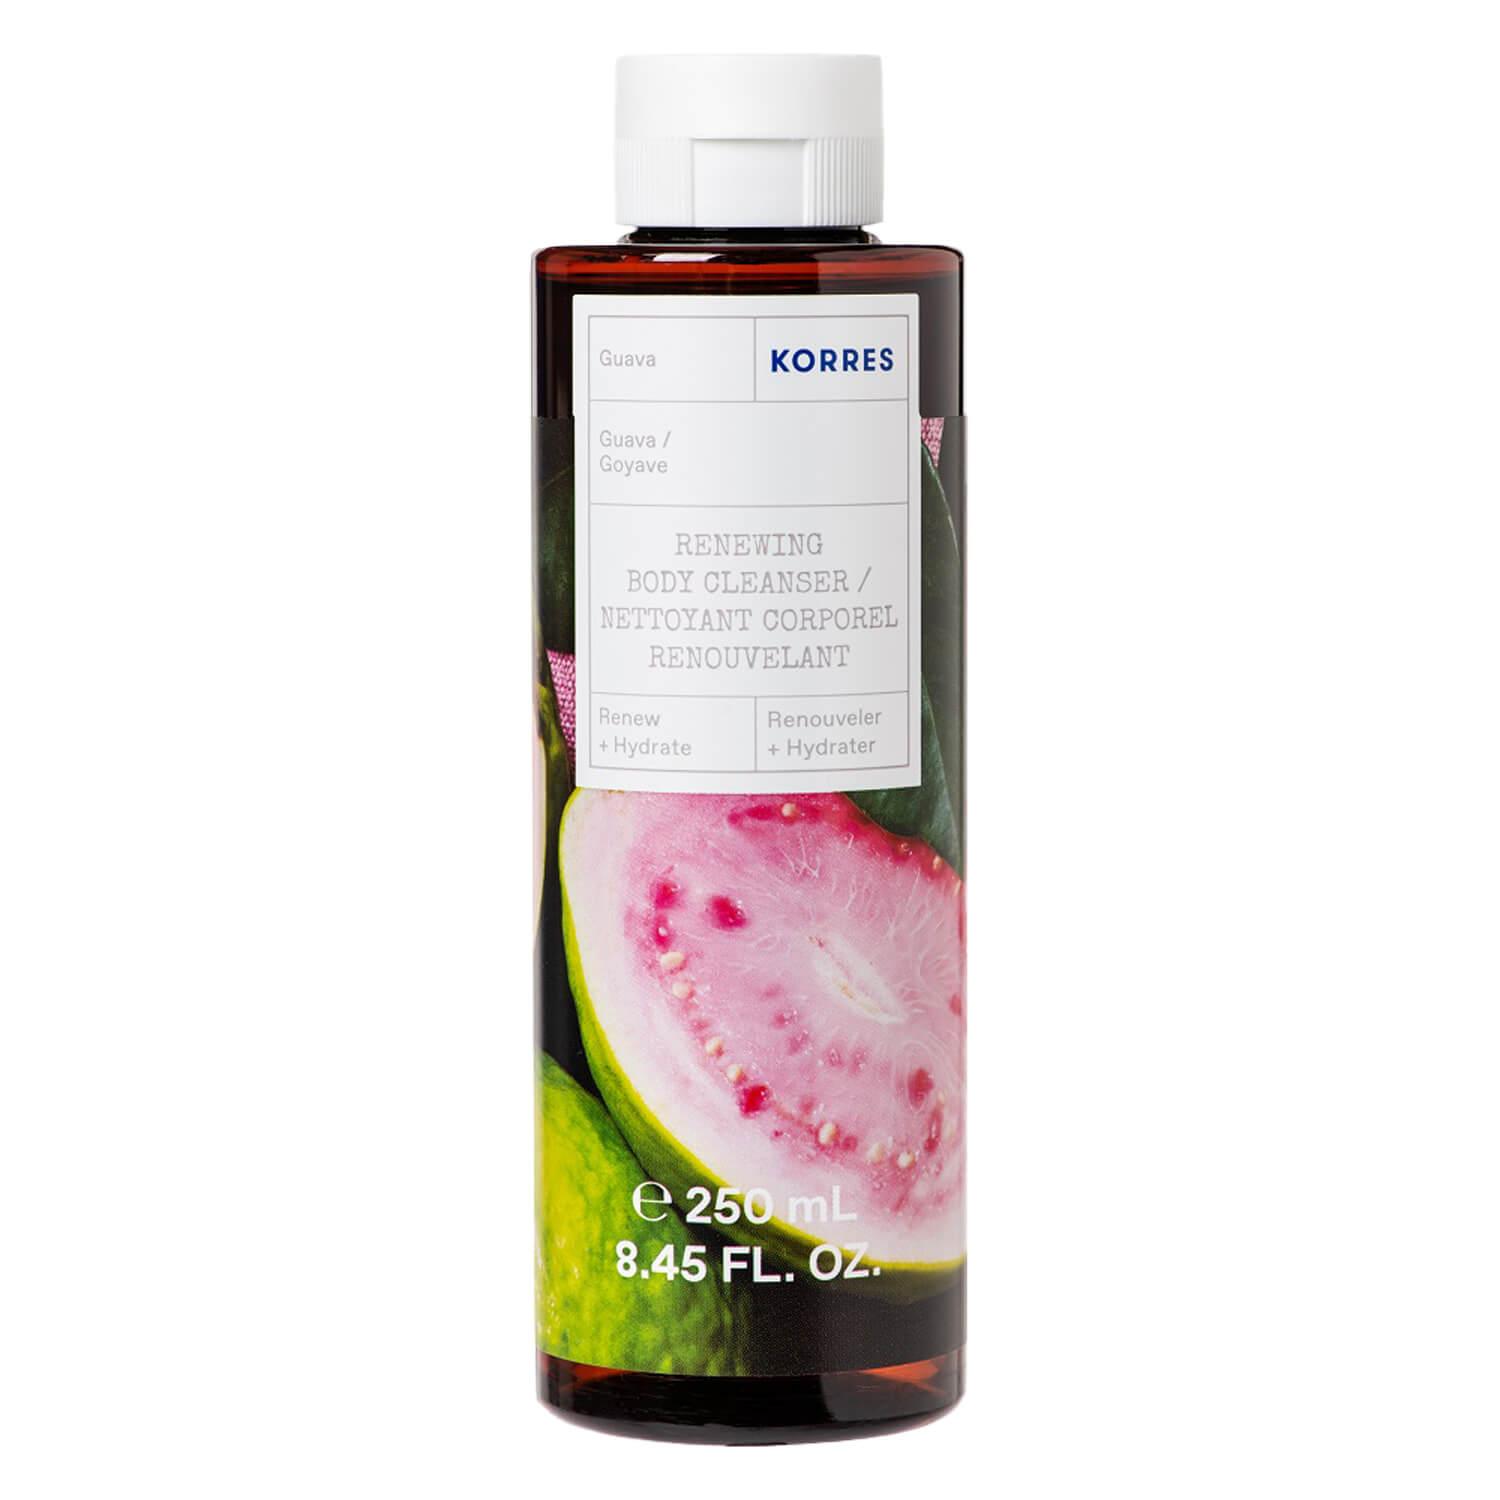 Korres Care - Guava Renewing Body Cleanser